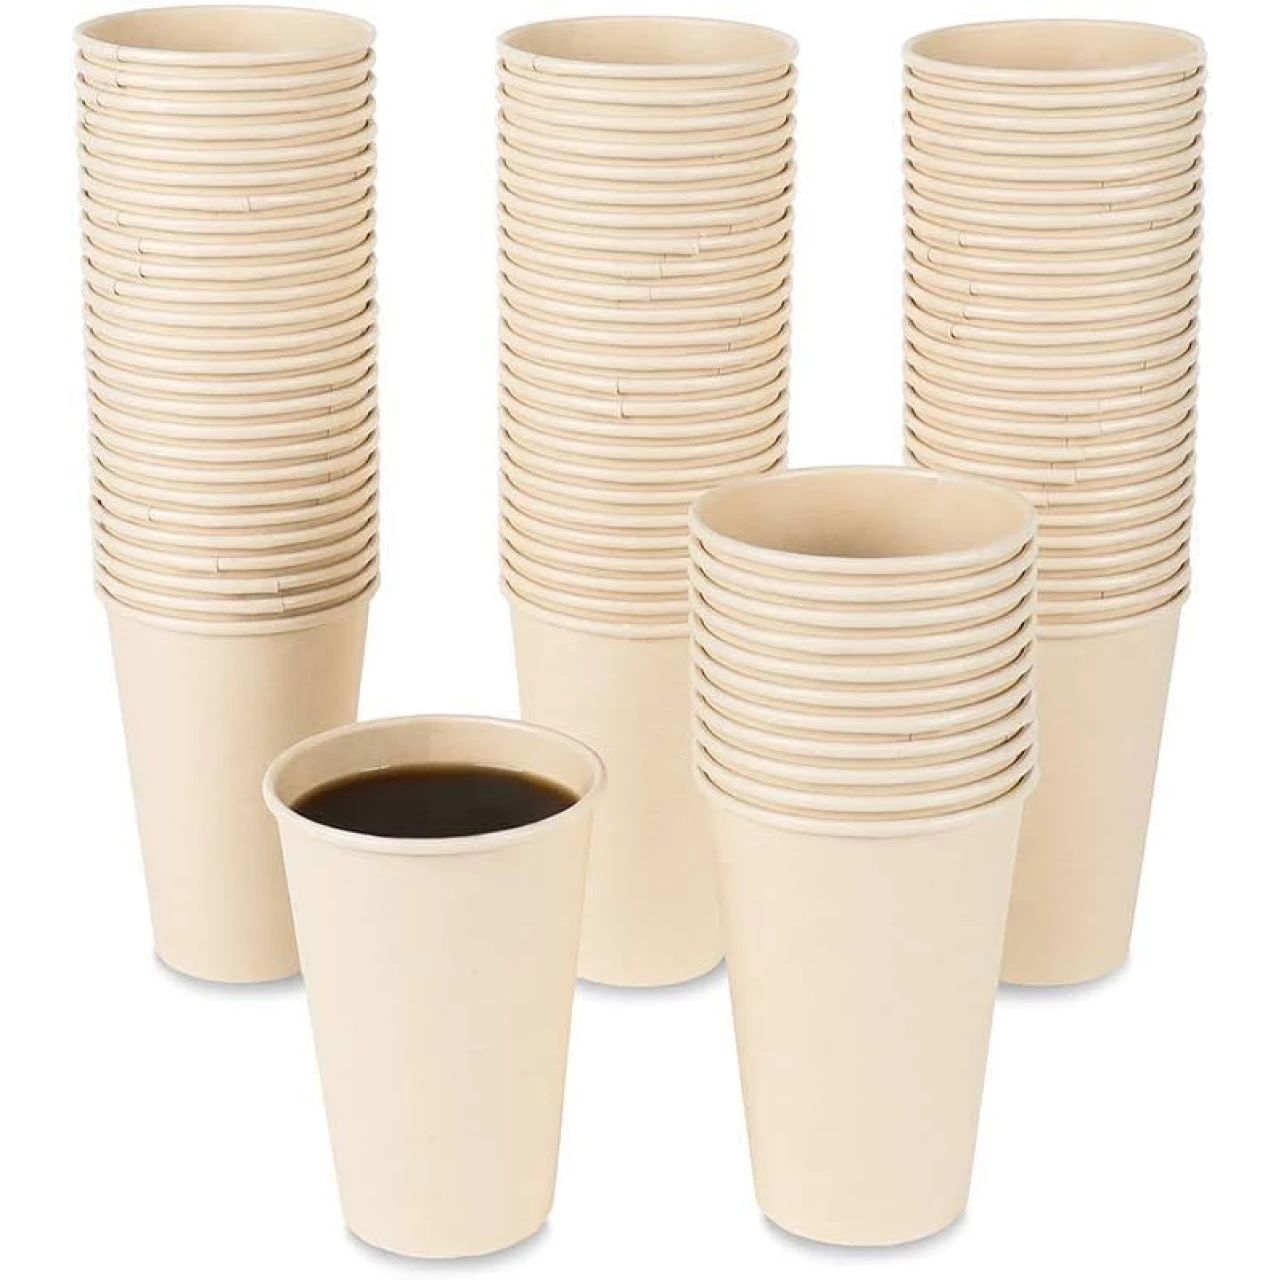 JAYEEY 100 Count 12 OZ Bamboo Fiber Disposable Light Brown Paper Coffee Cups